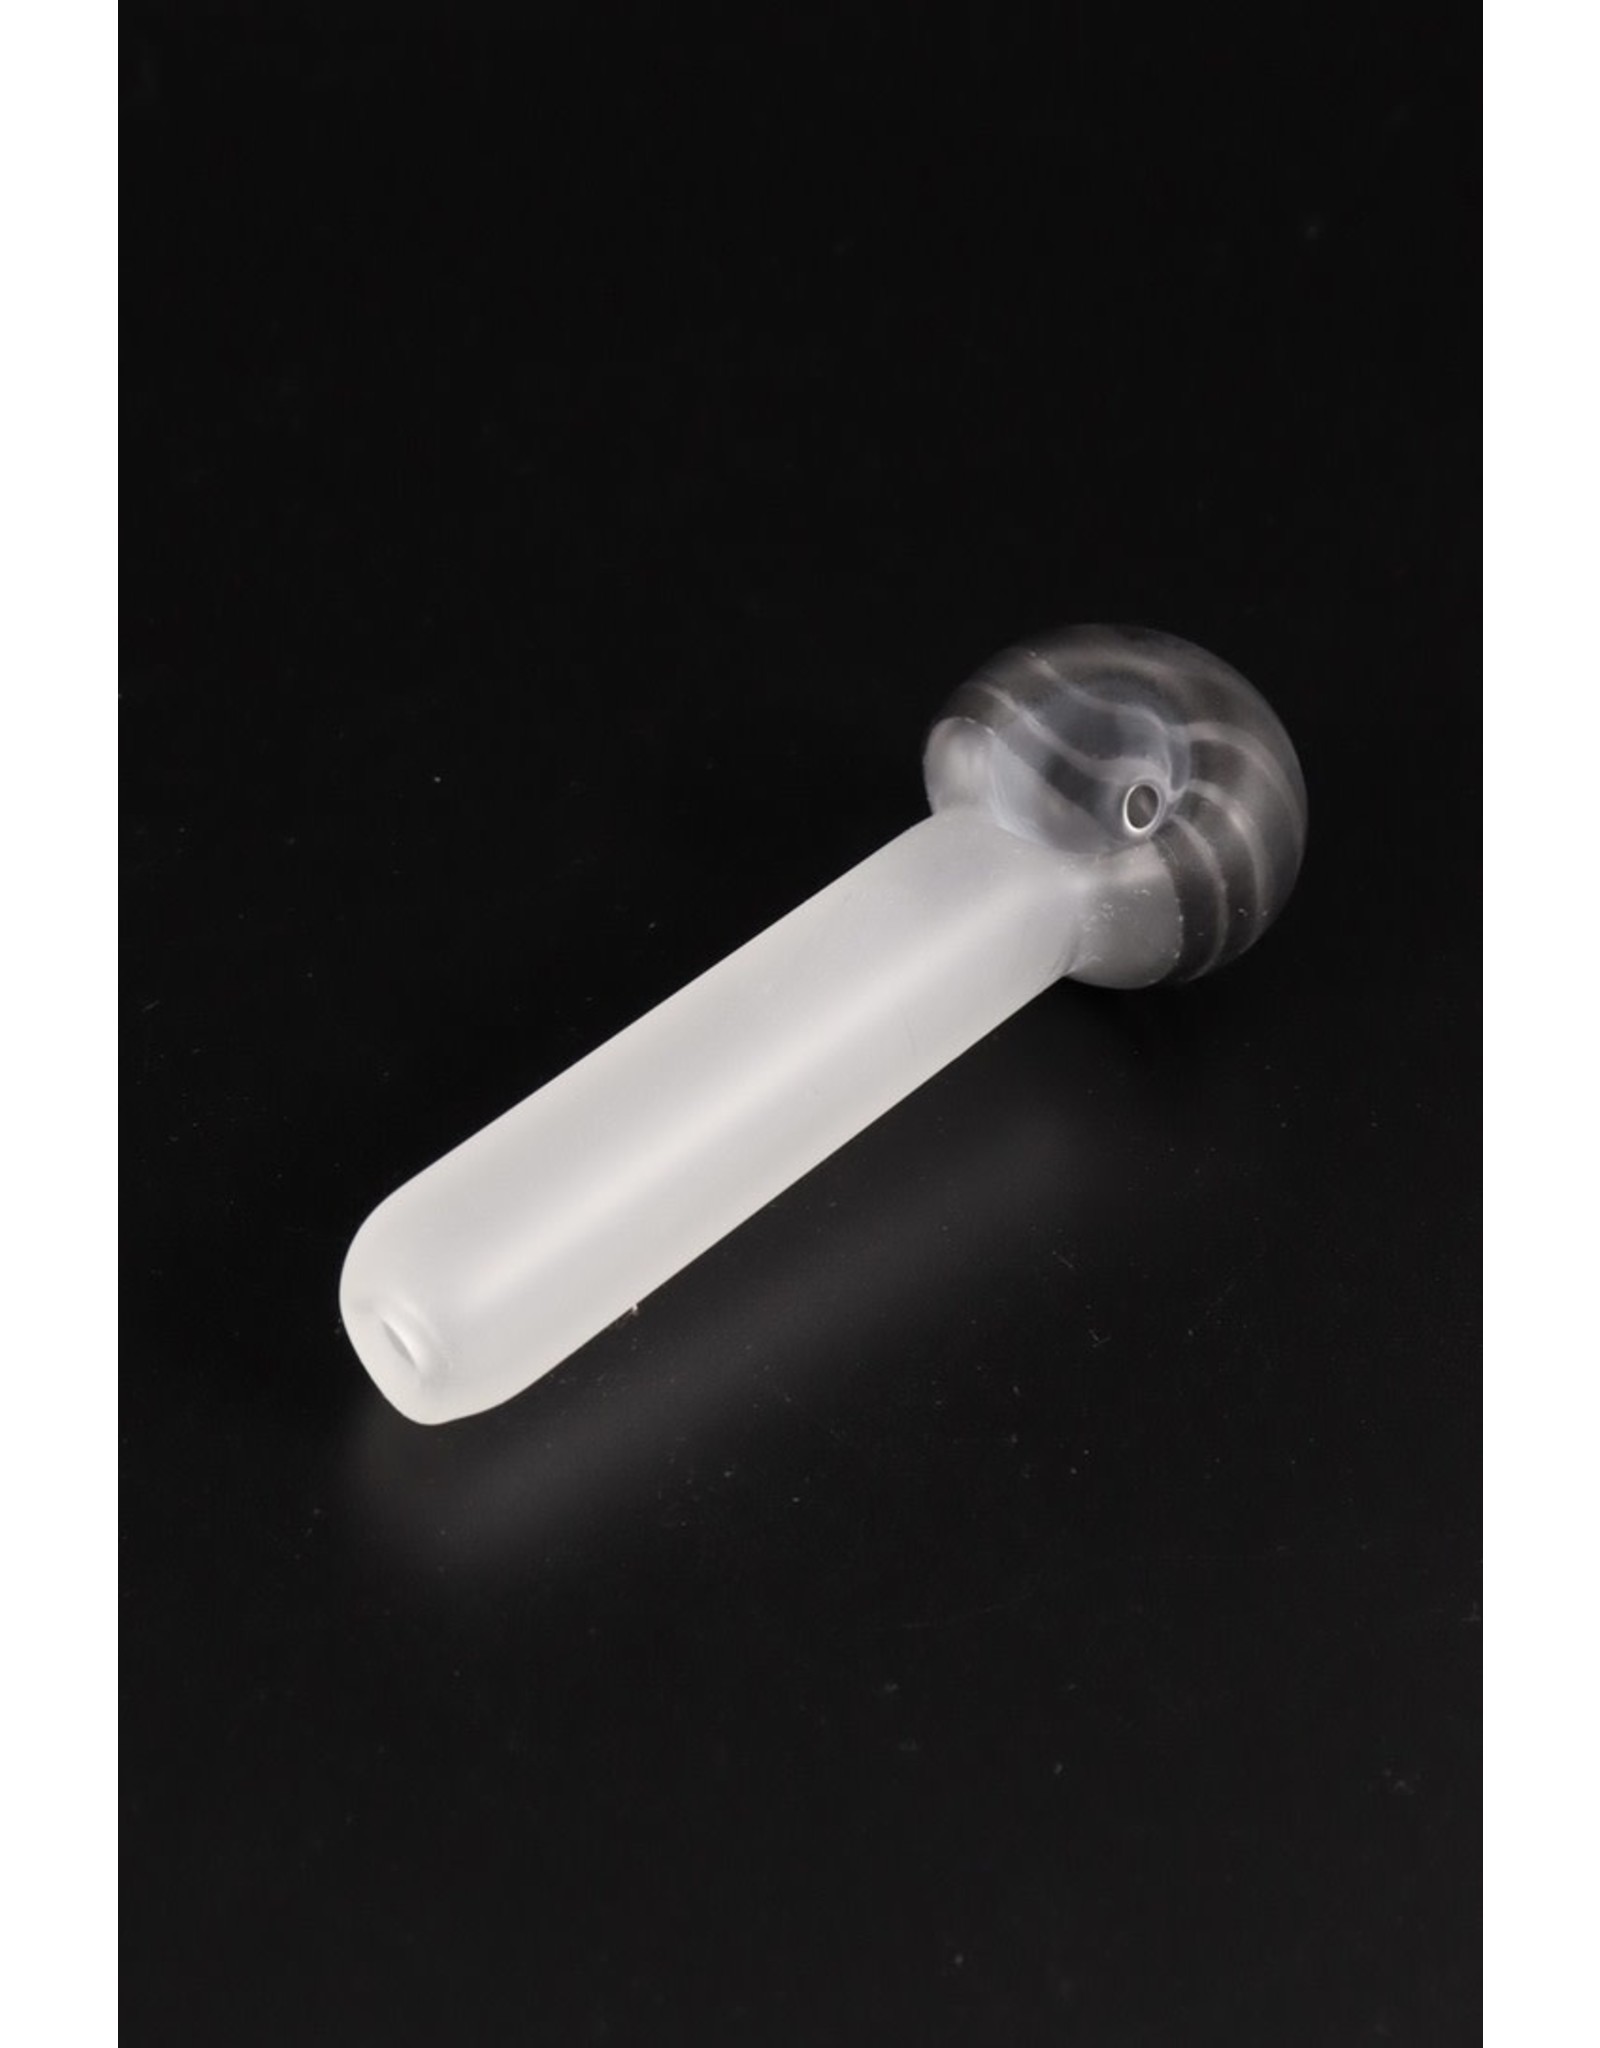 Jellyfish Glass Medium Frosted Jerika Color Wrap Hand Pipe